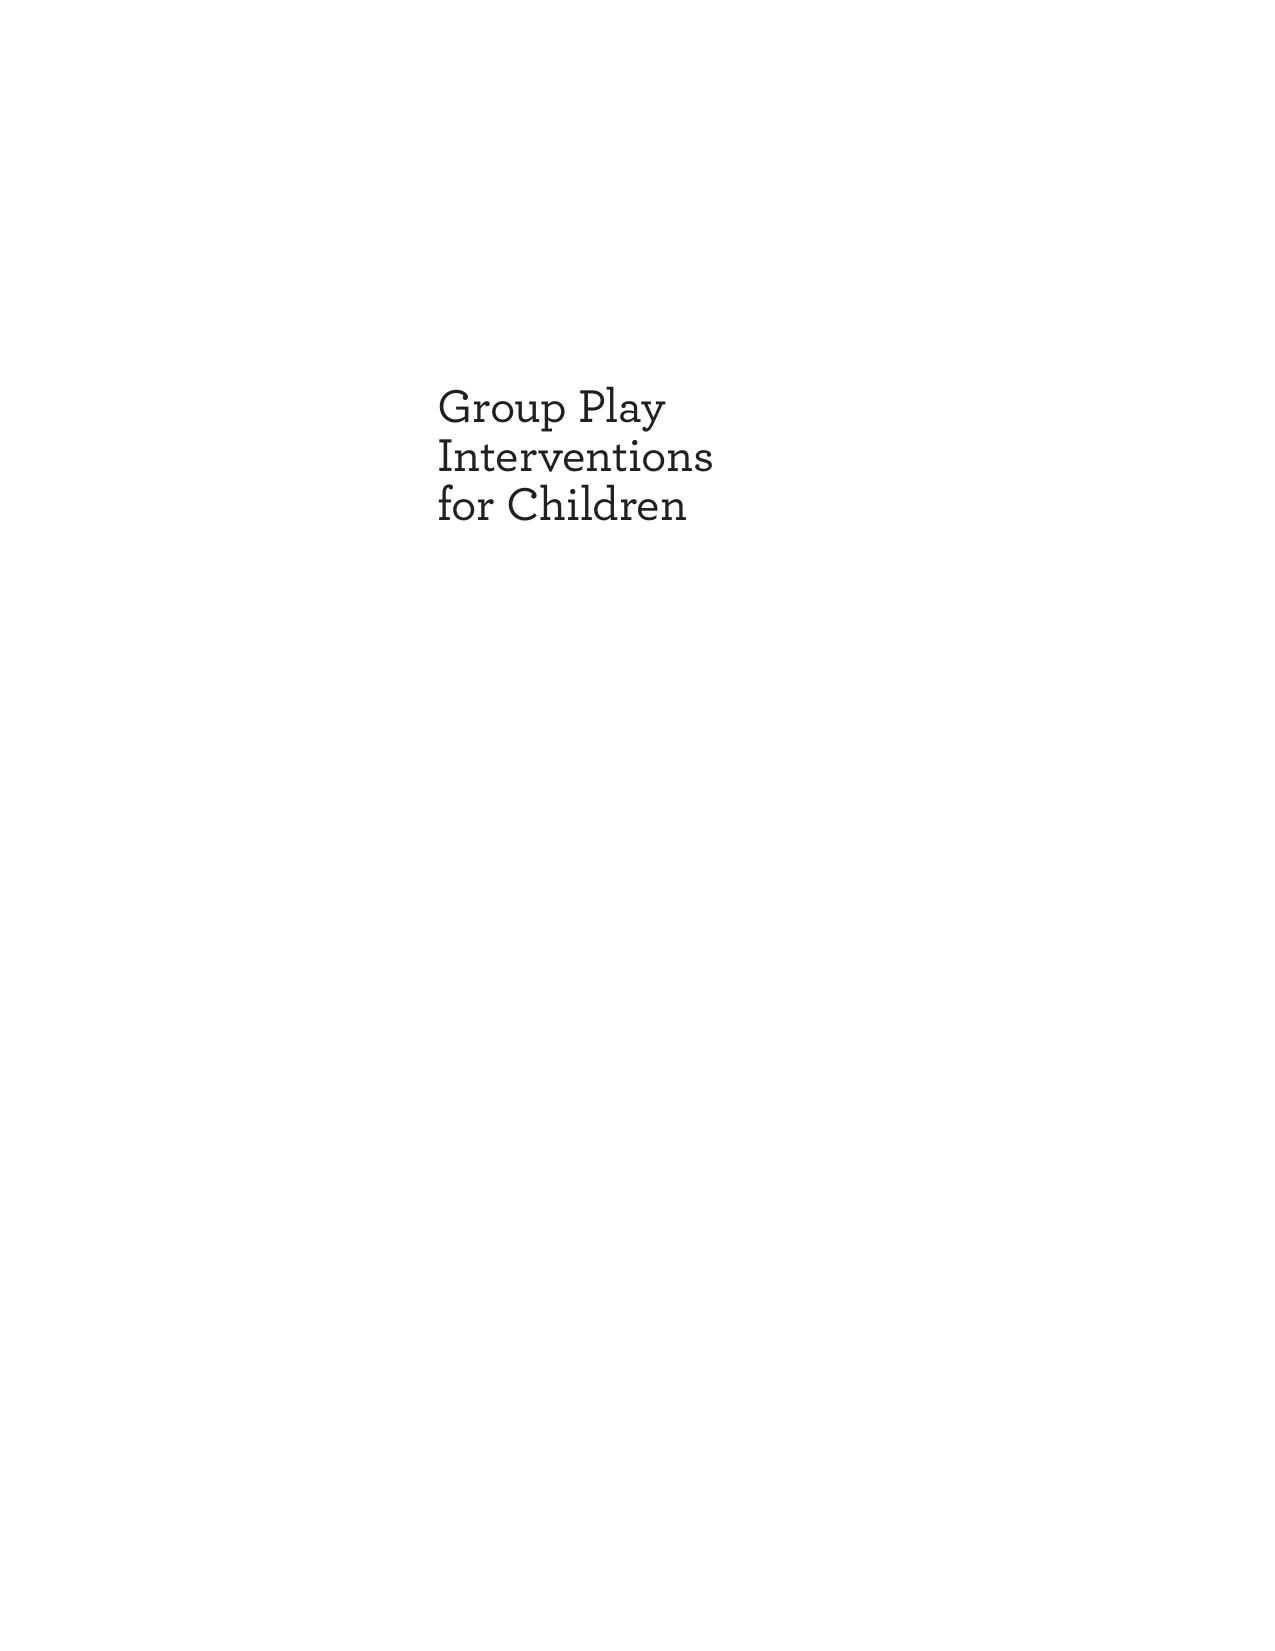 Group Play Interventions for Children